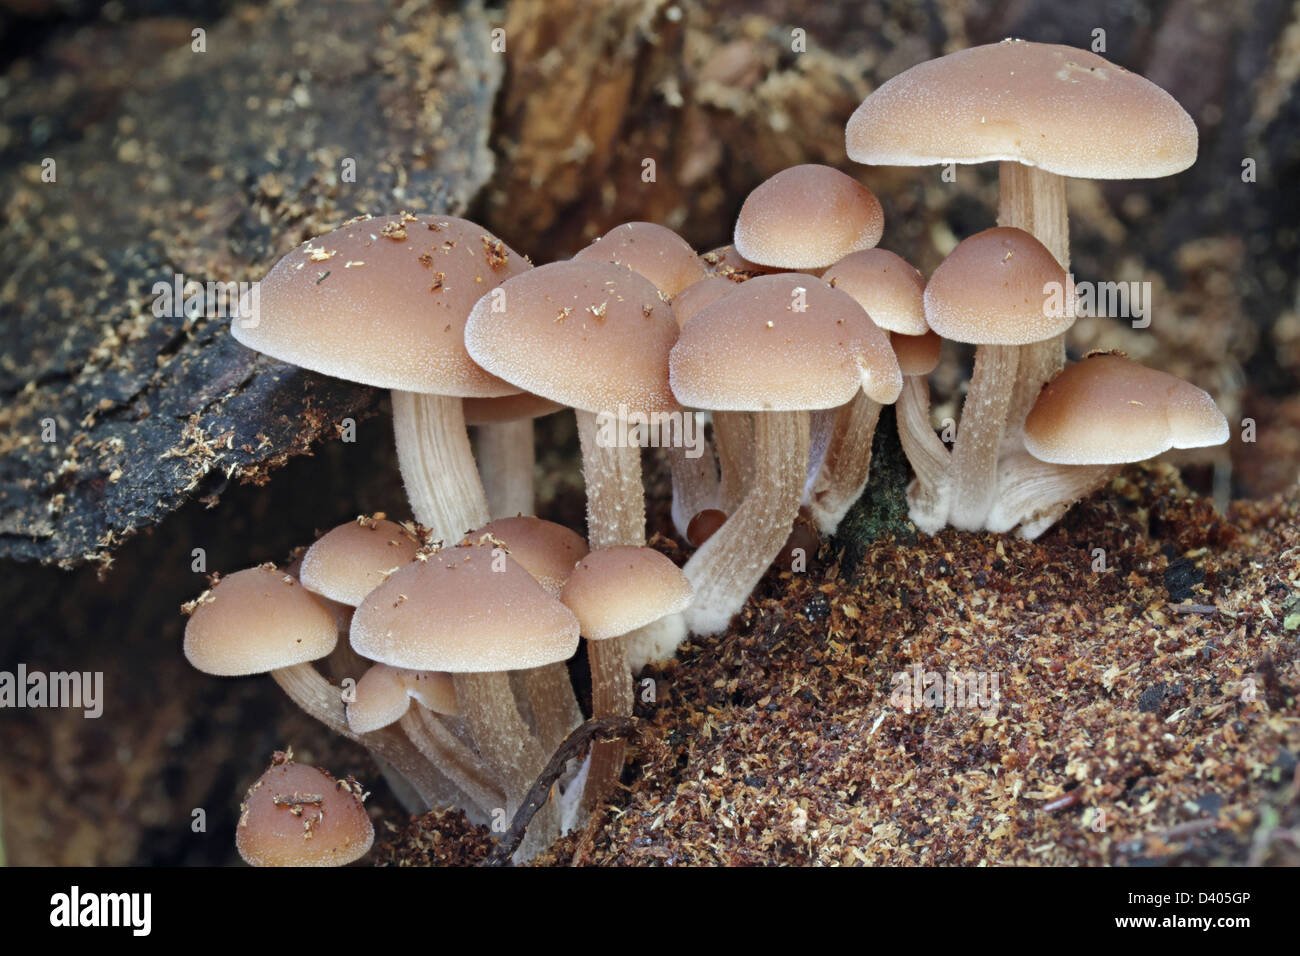 A cluster of mushrooms, Clitocybula (Collybia) familia, growing on the stump of a dead pine tree. Stock Photo